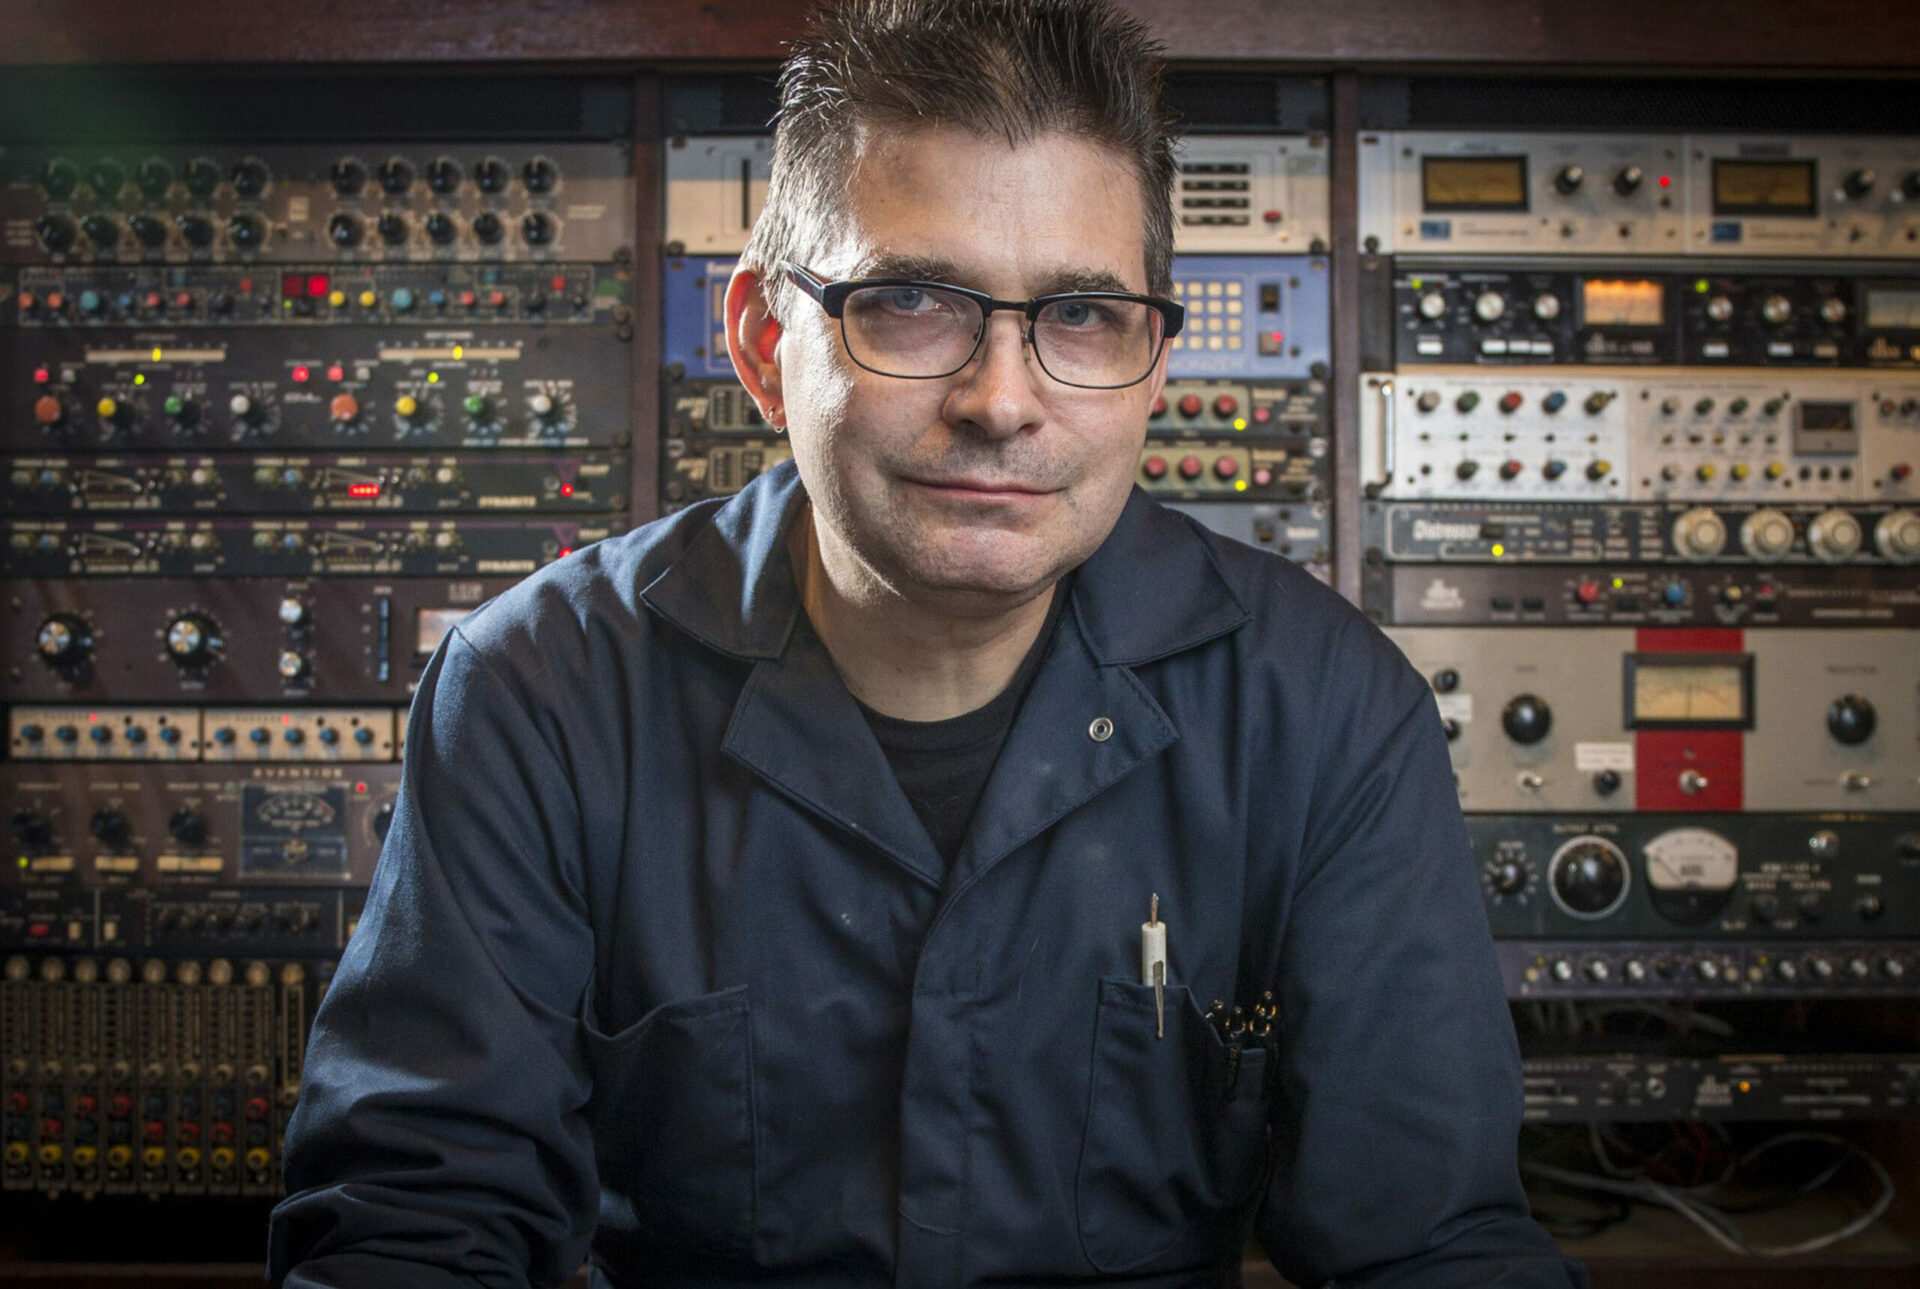 Steve Albini, influential record producer and musician, dies at 61